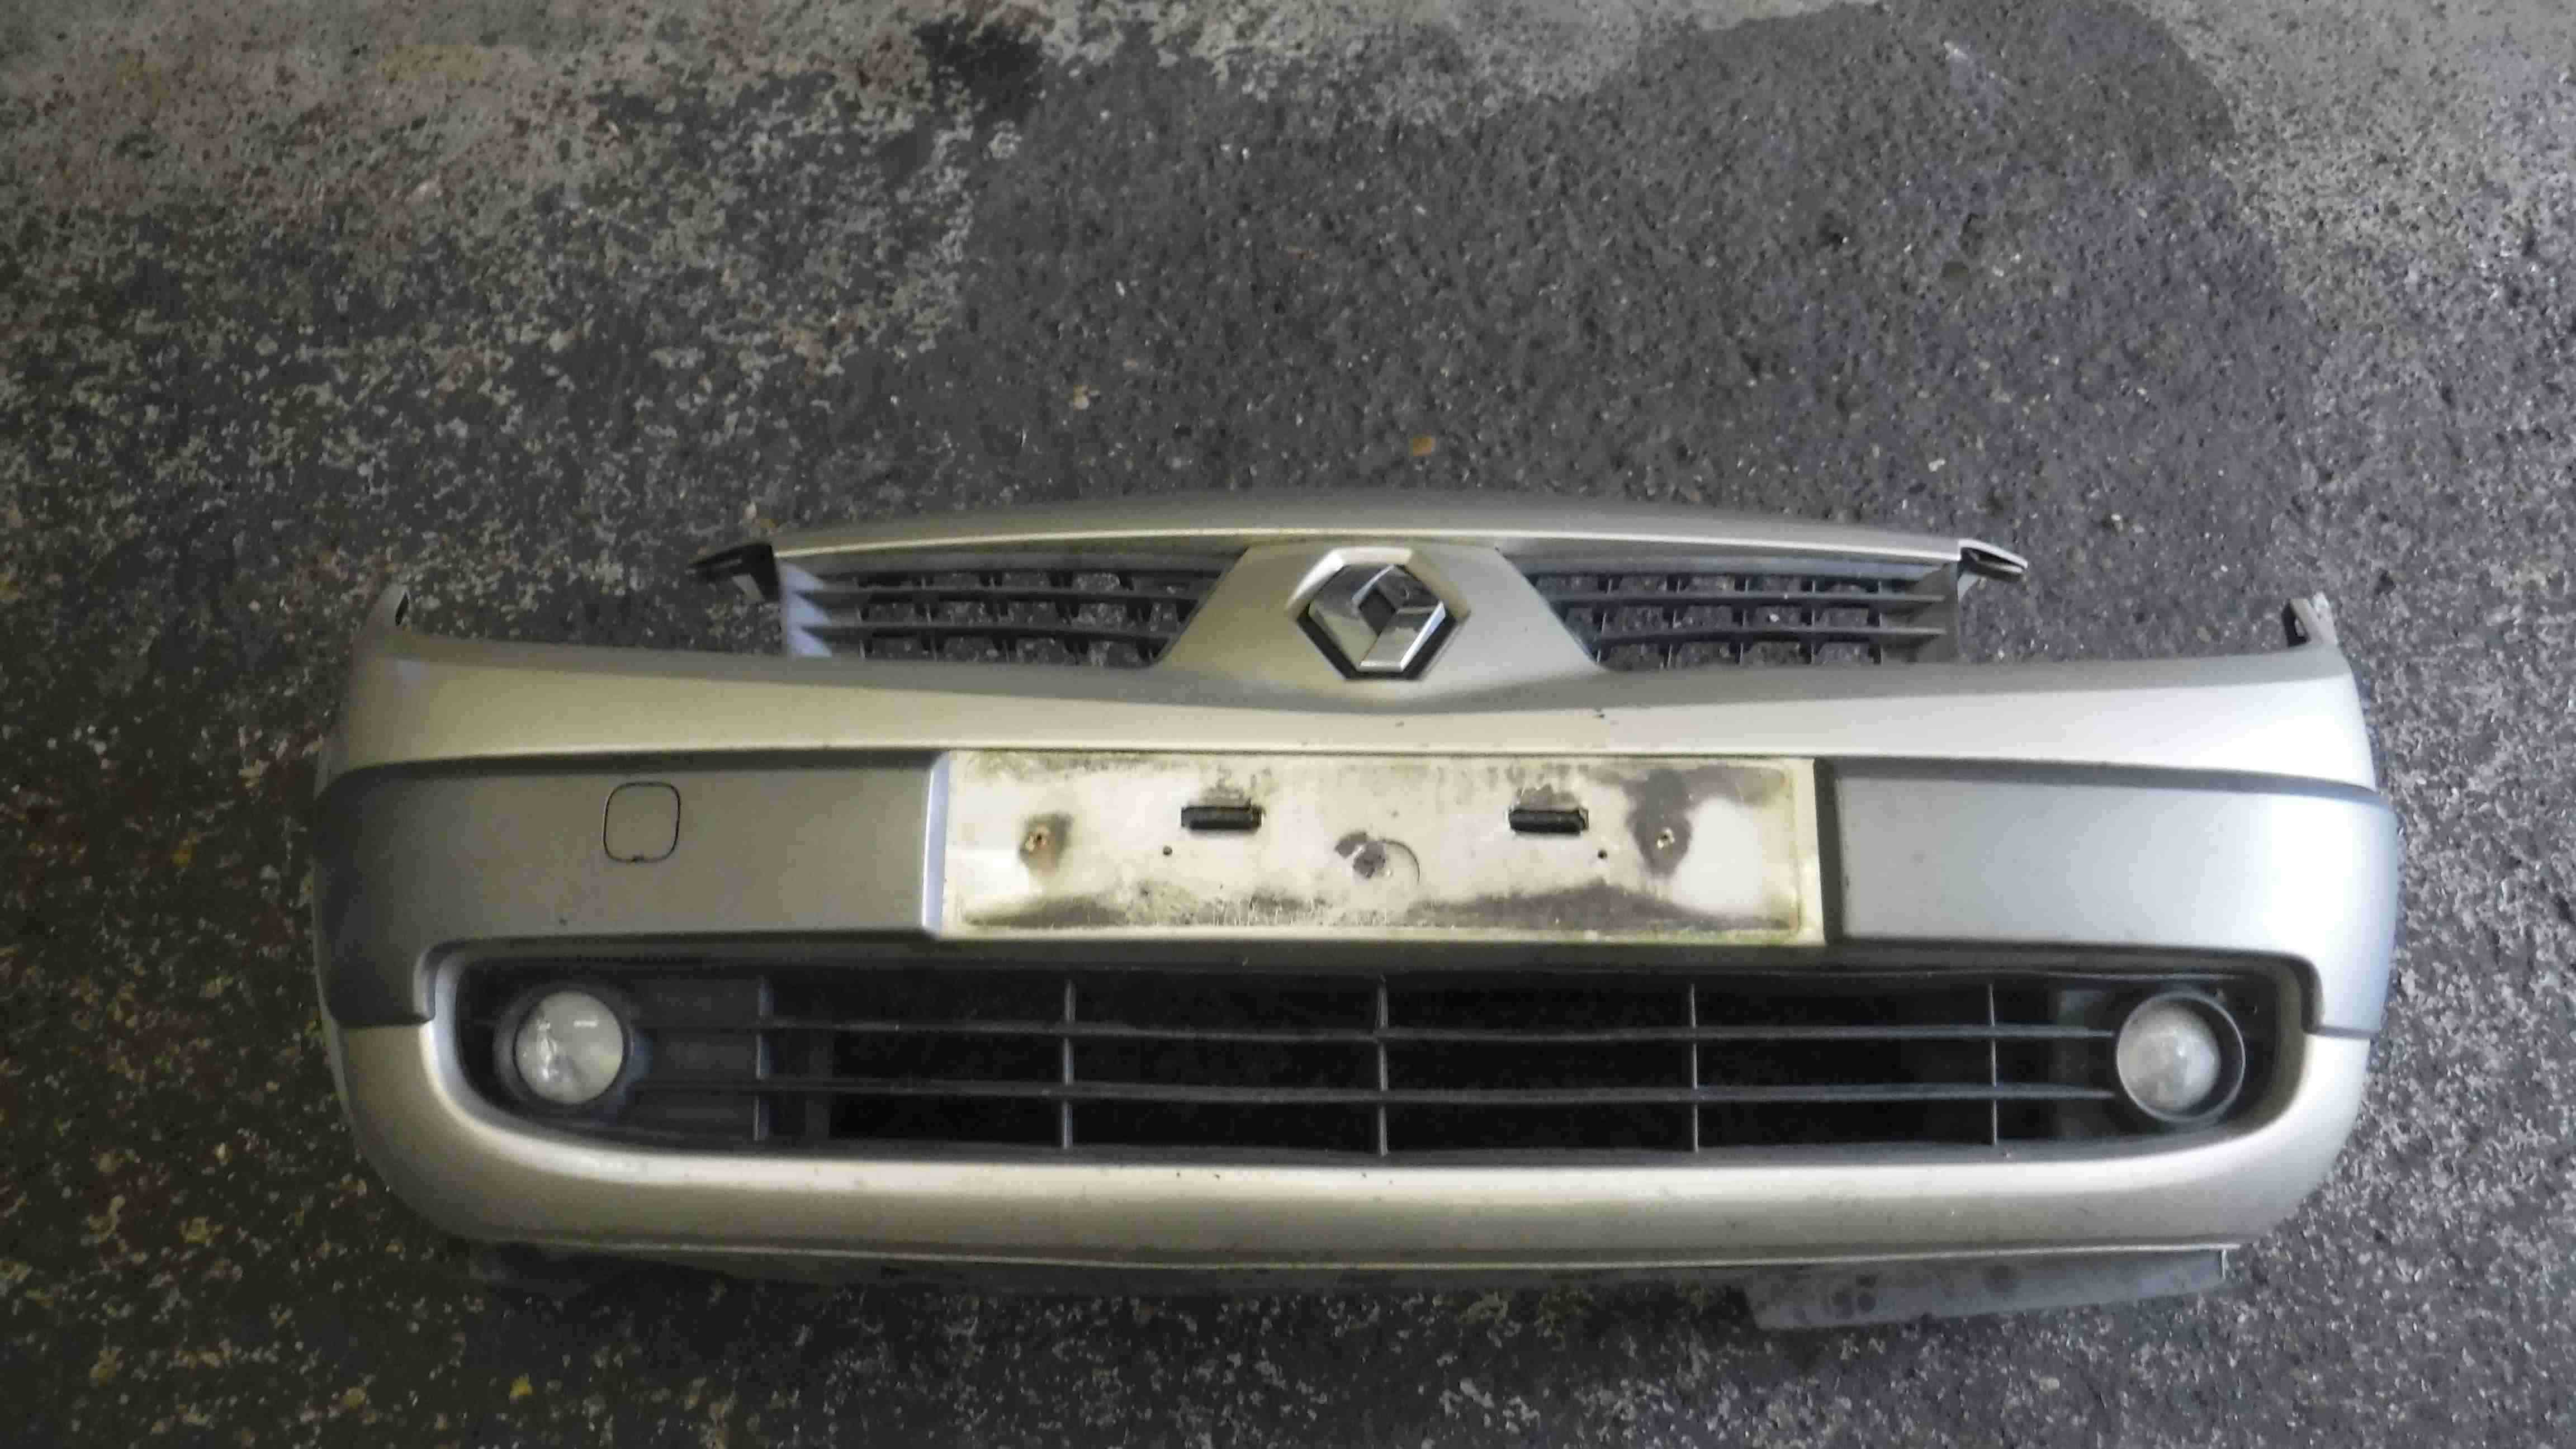 Renault Megane Scenic 2003-2009 Bumper Beige TED11 - Store - Renault - Used Renault Parts & Spares Specialist